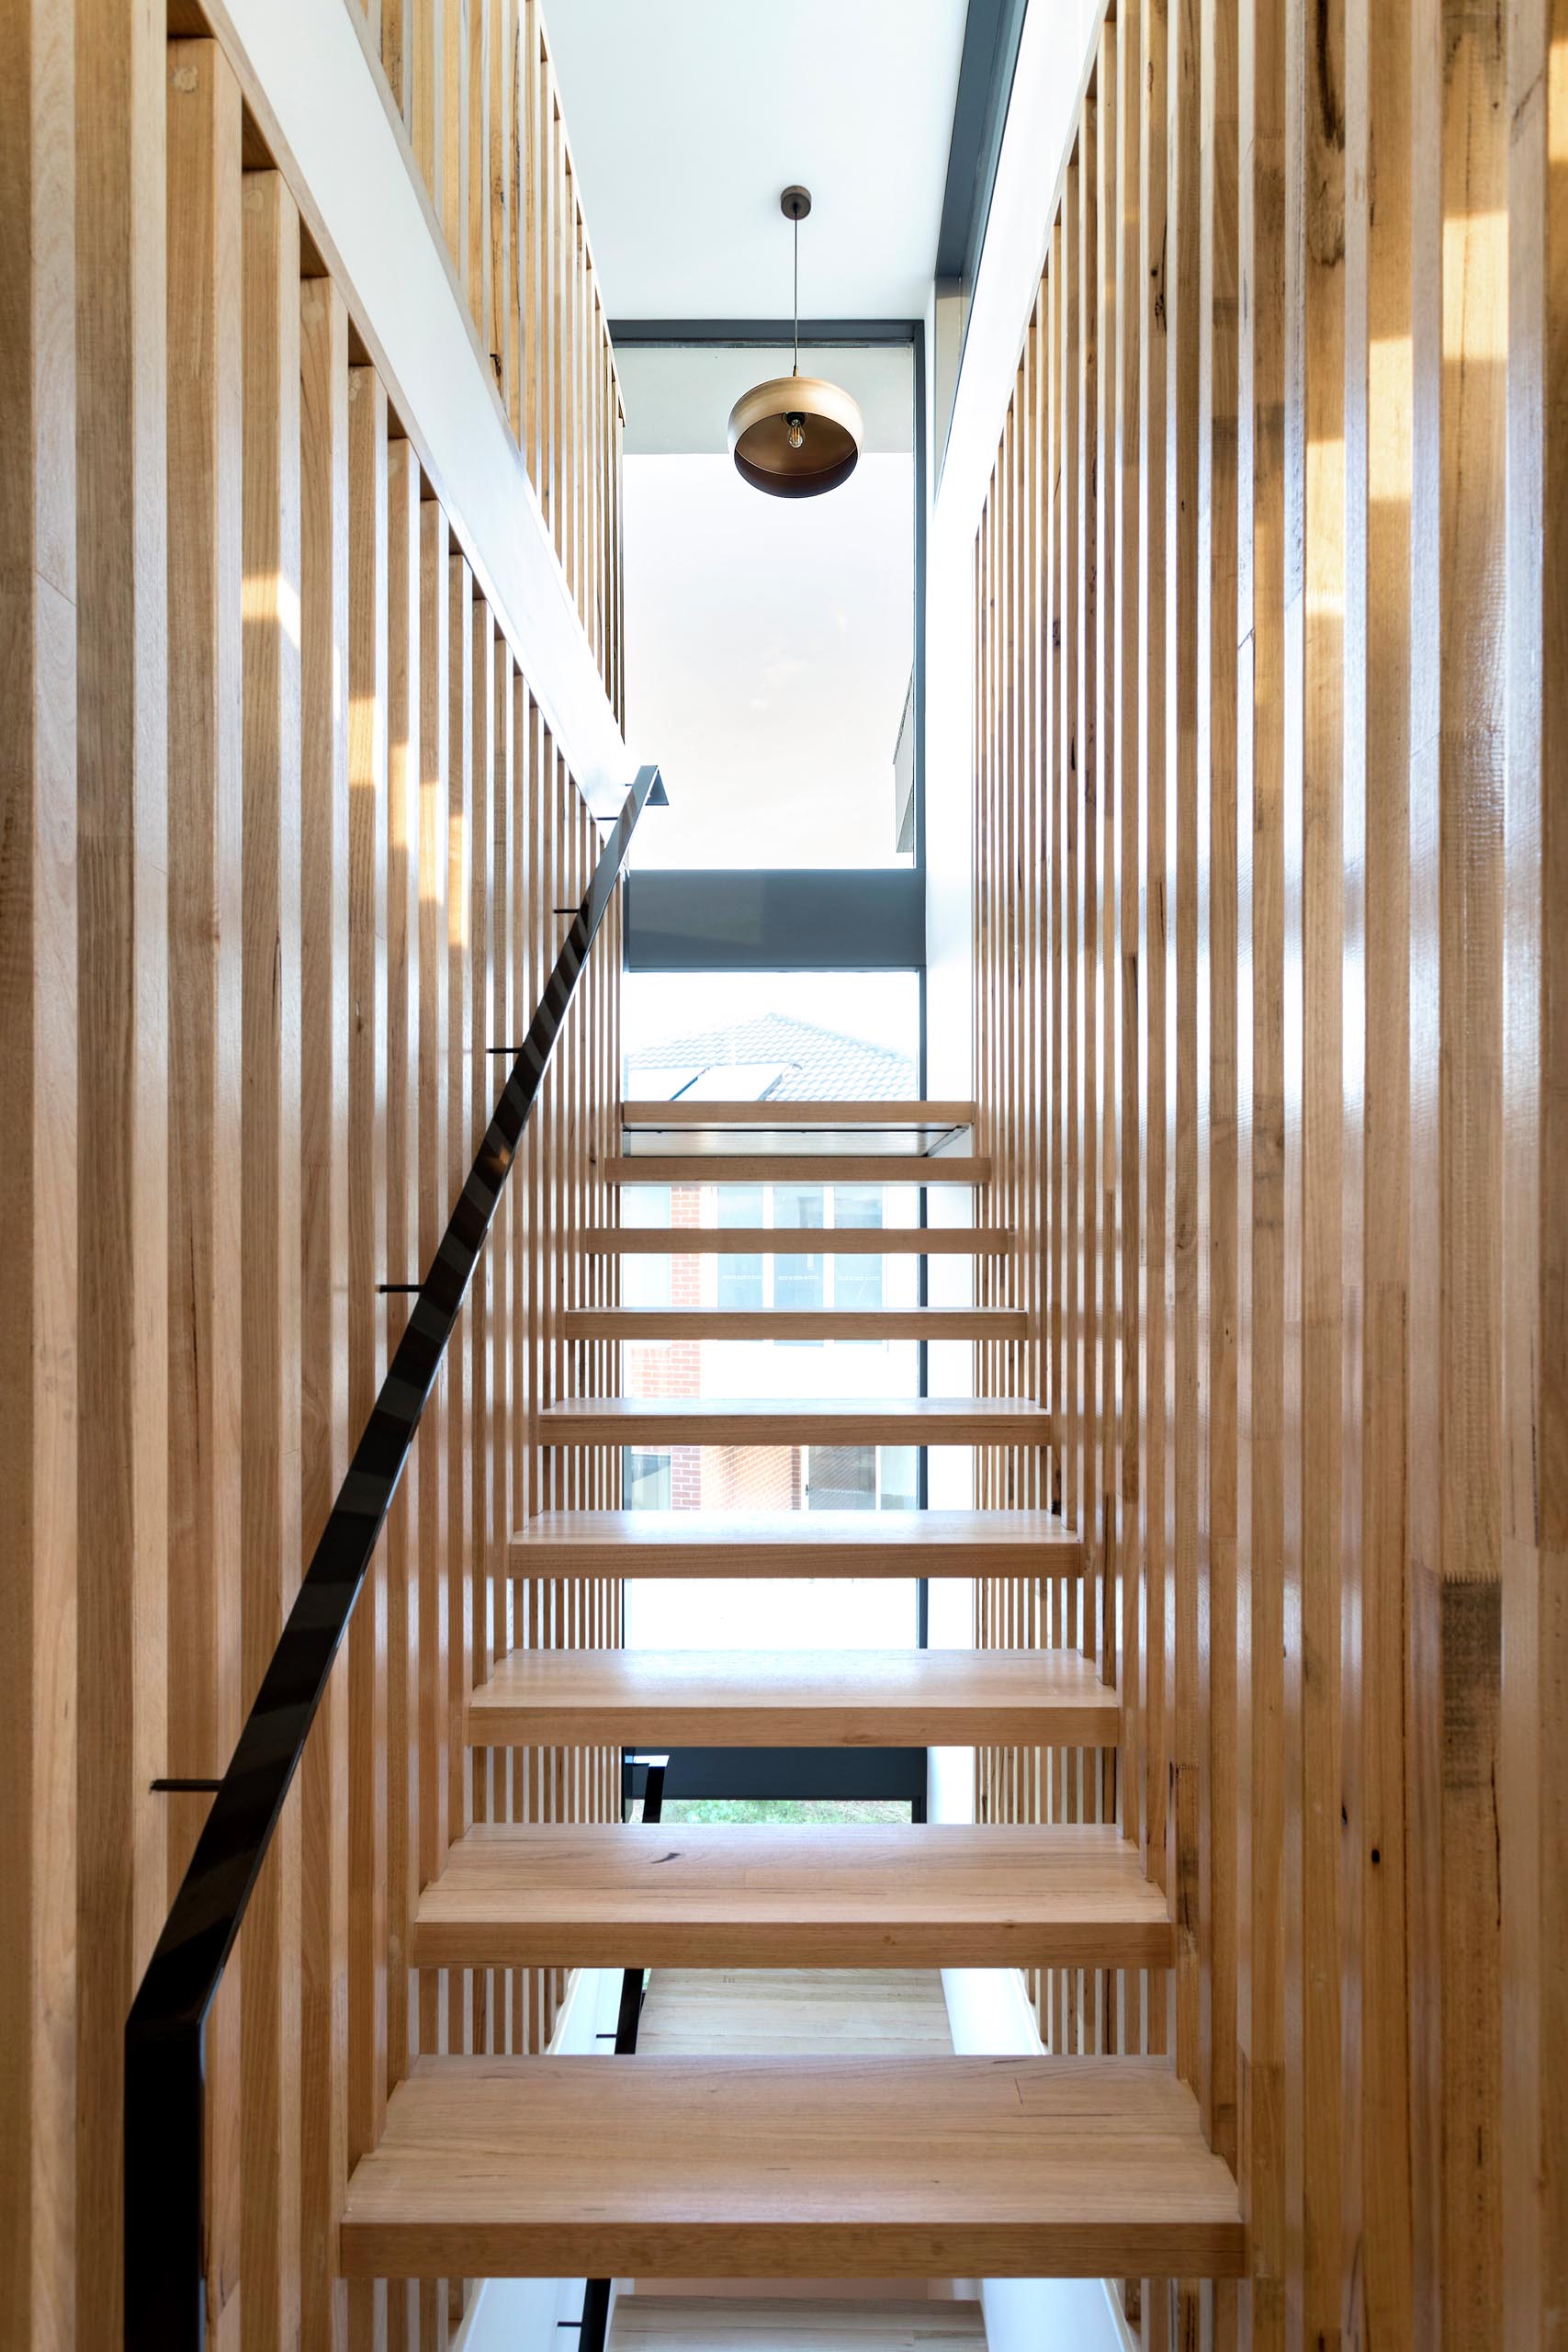 This staircase has solid timber stair tread that sit perfectly in between long vertical timber battens without the need for stair stringers.